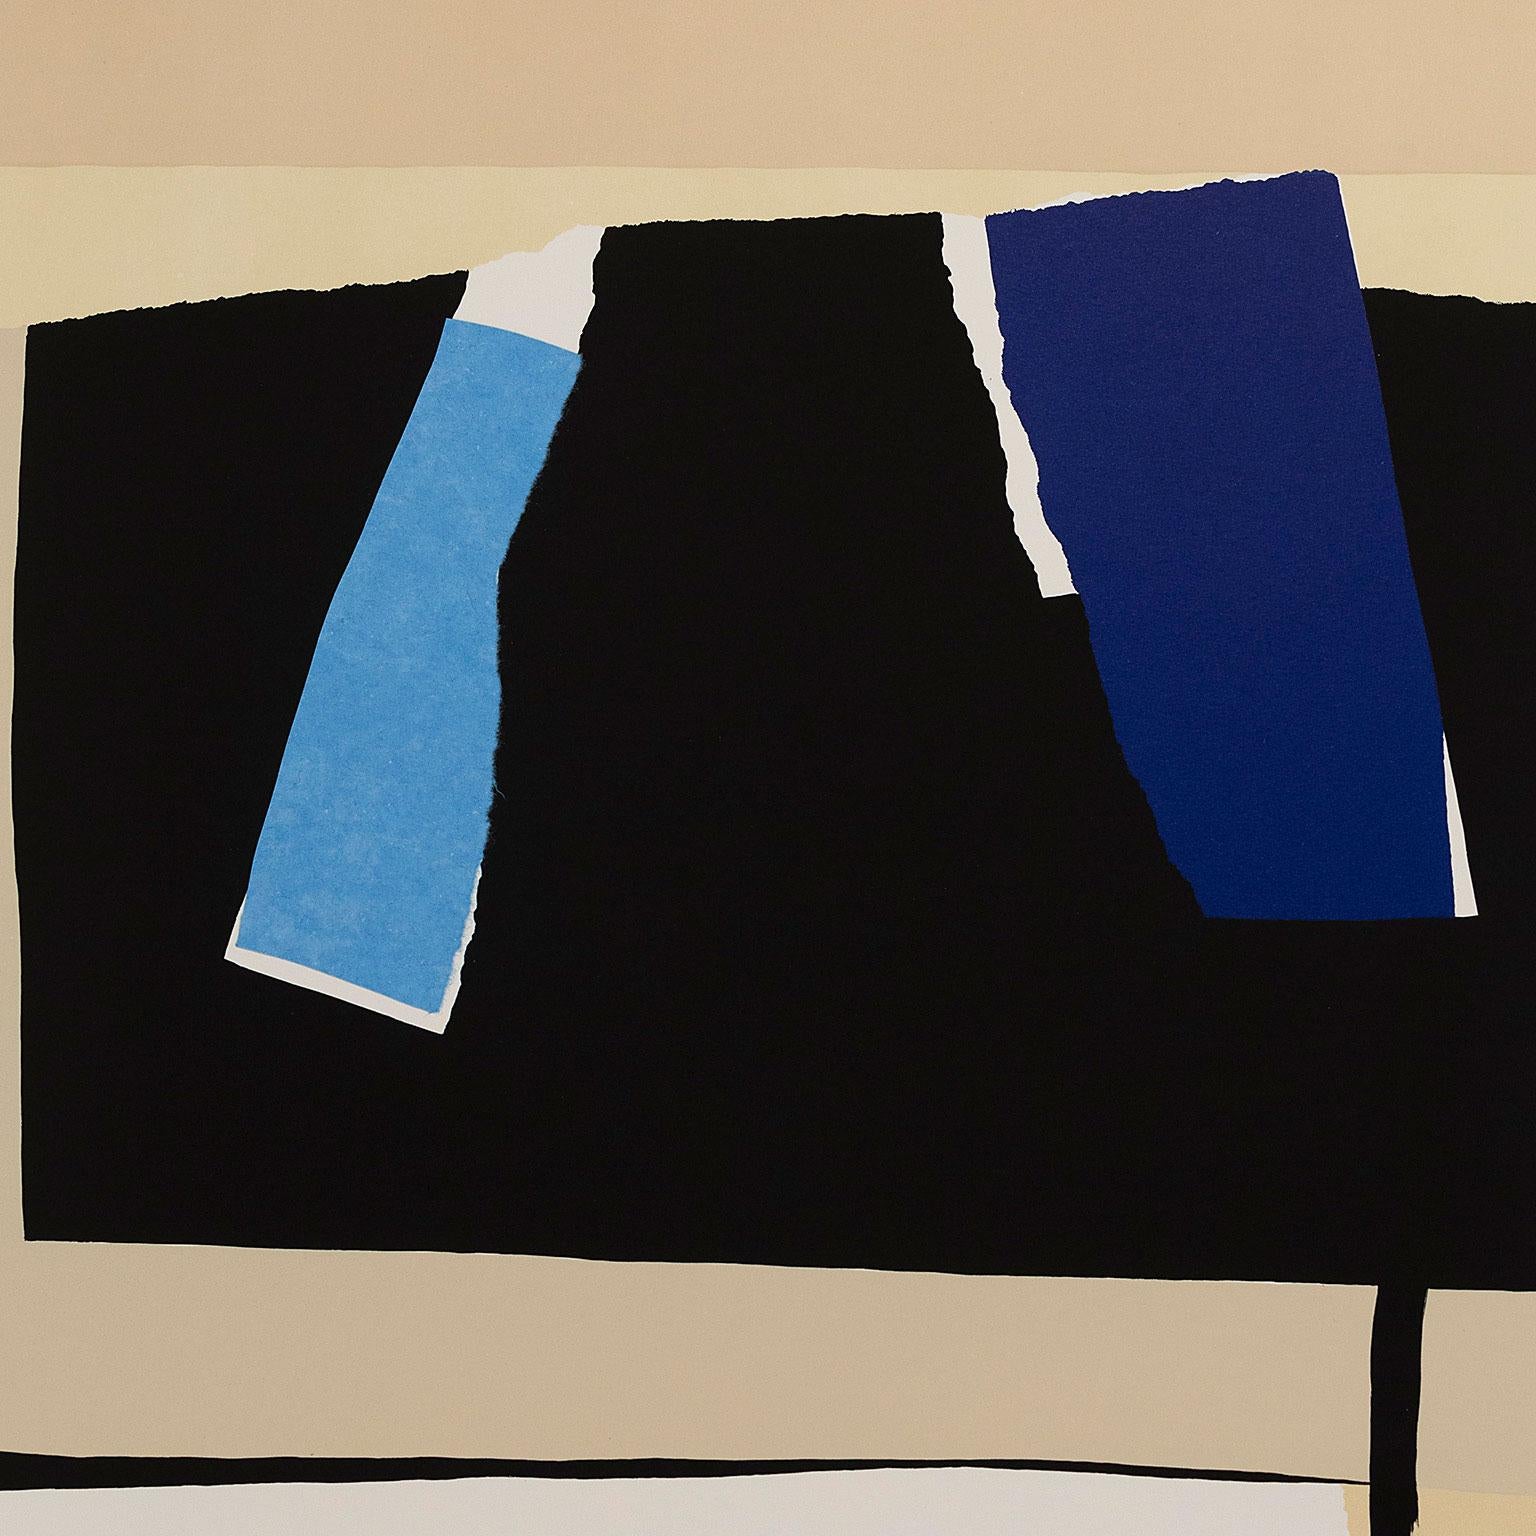 America-La France Variations VI - Abstract Expressionist Print by Robert Motherwell